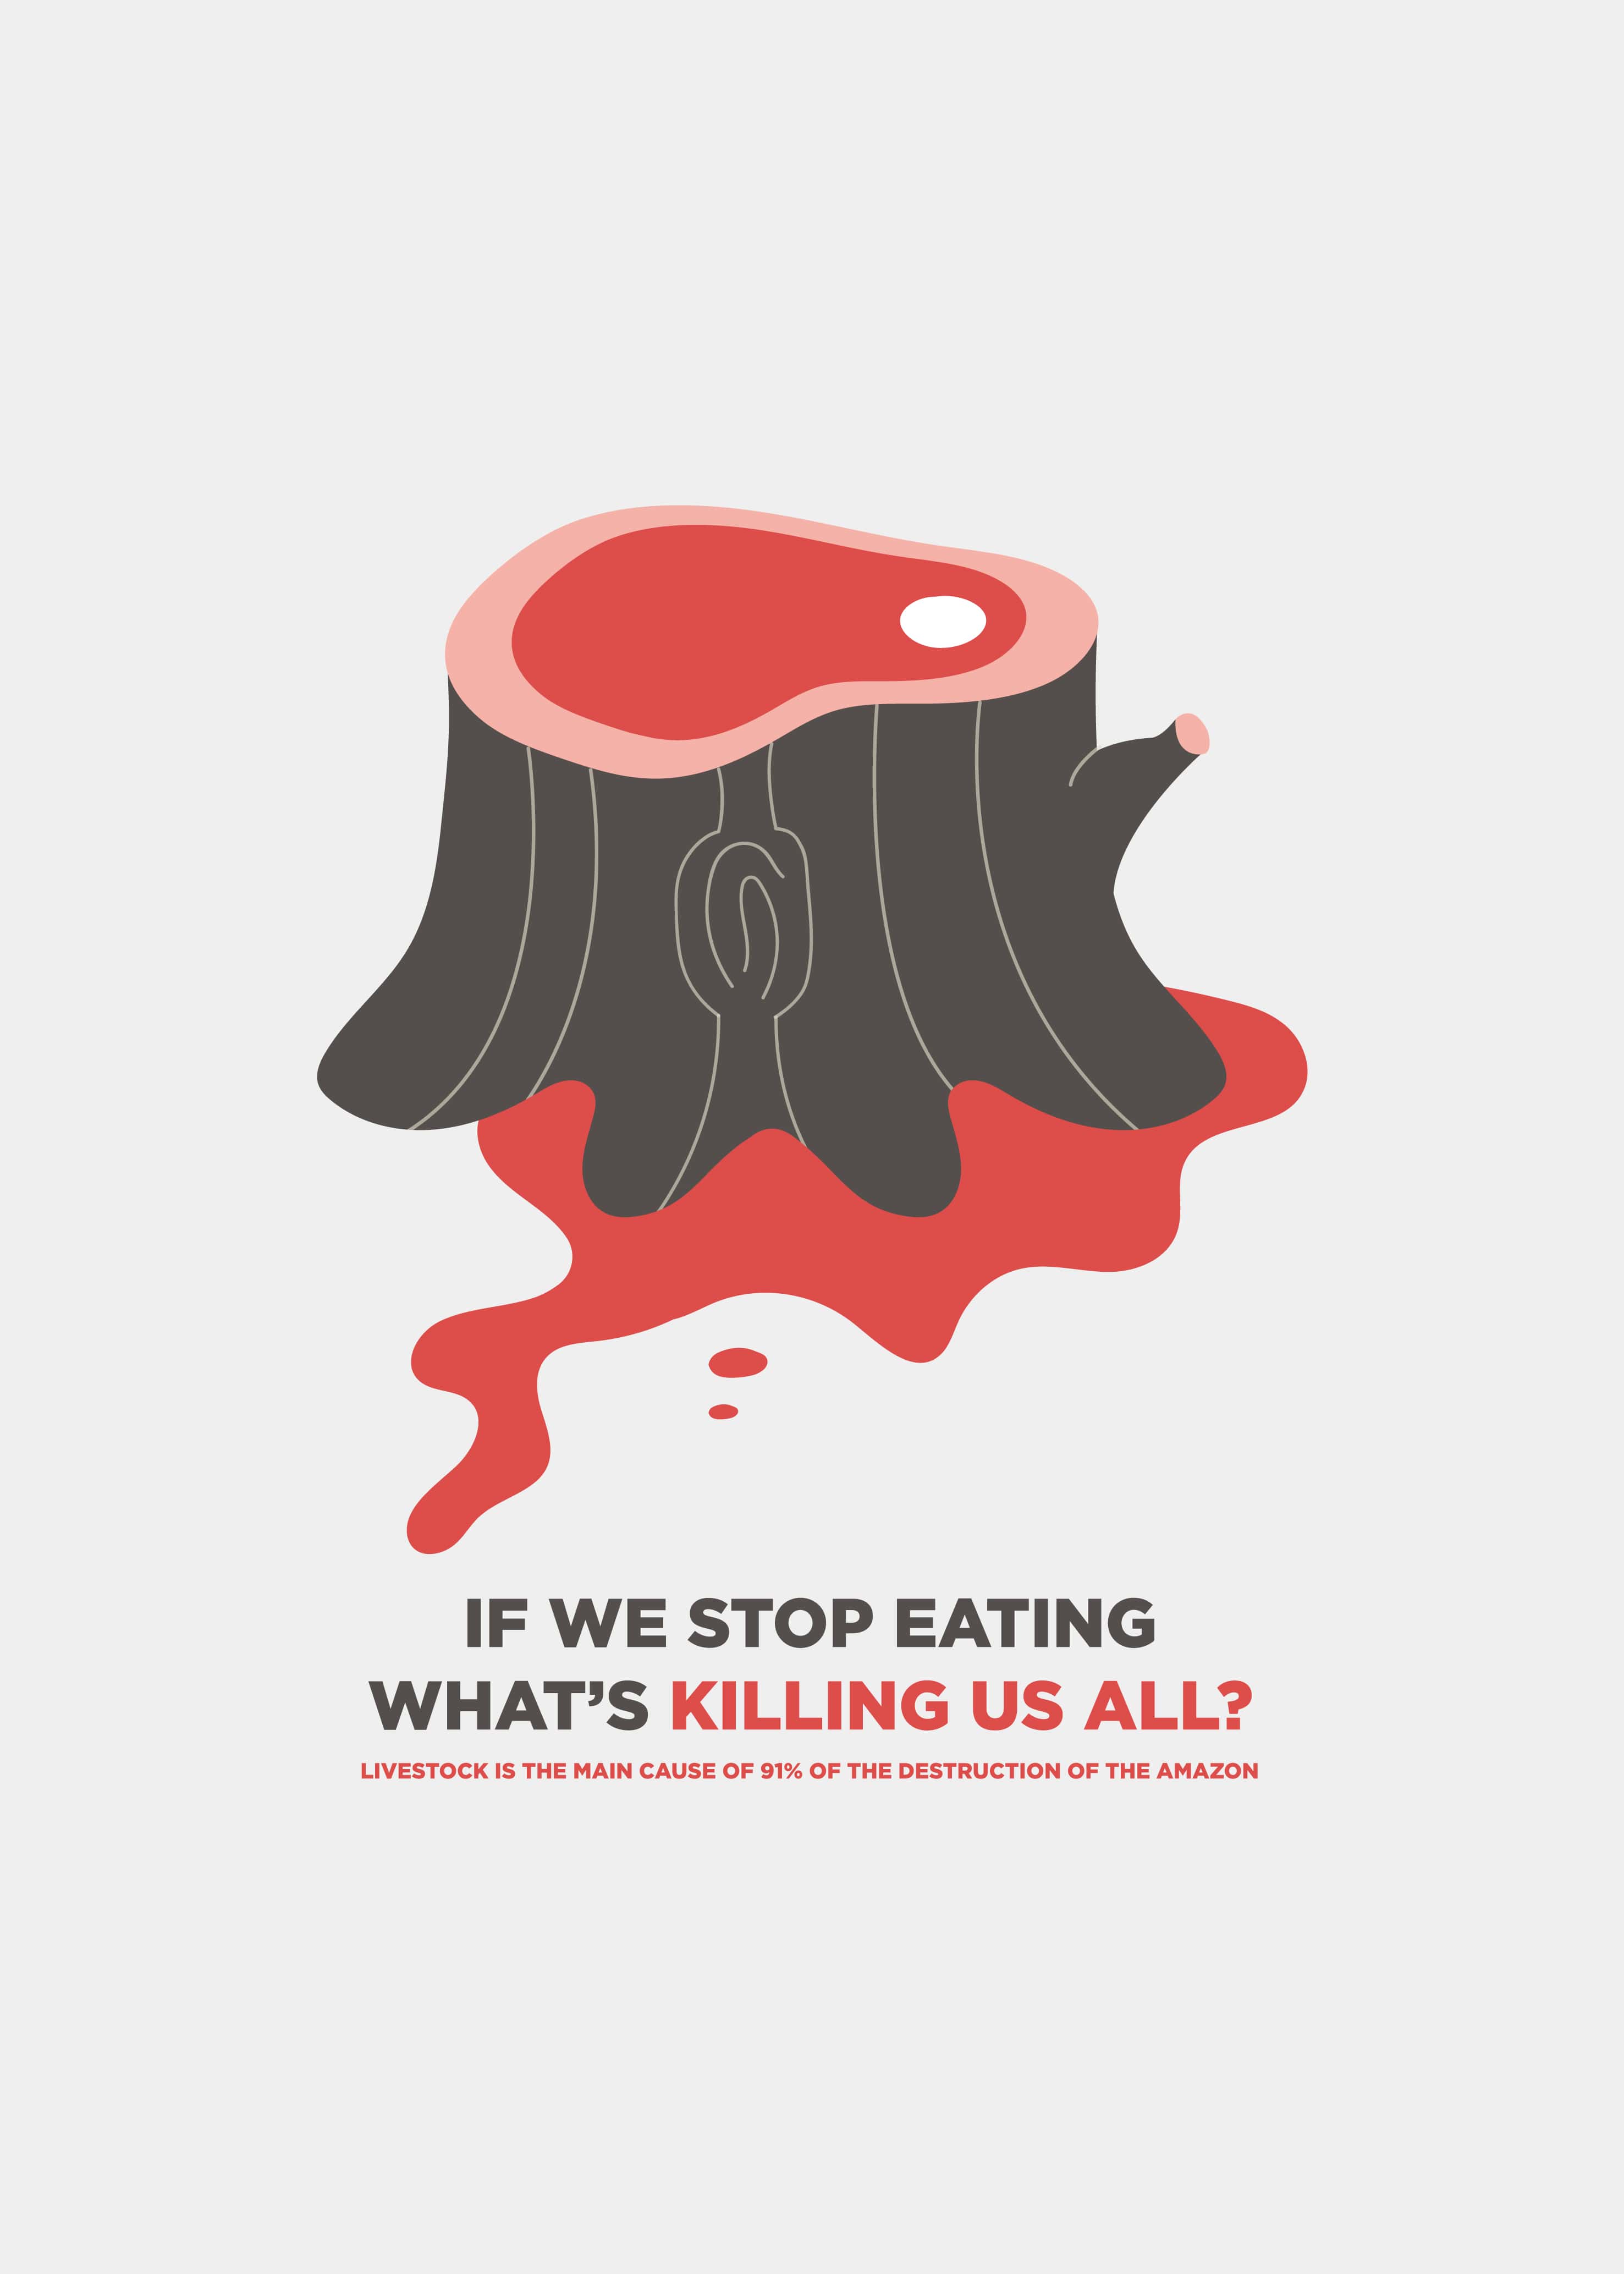 IF WE STOP EATING - 01